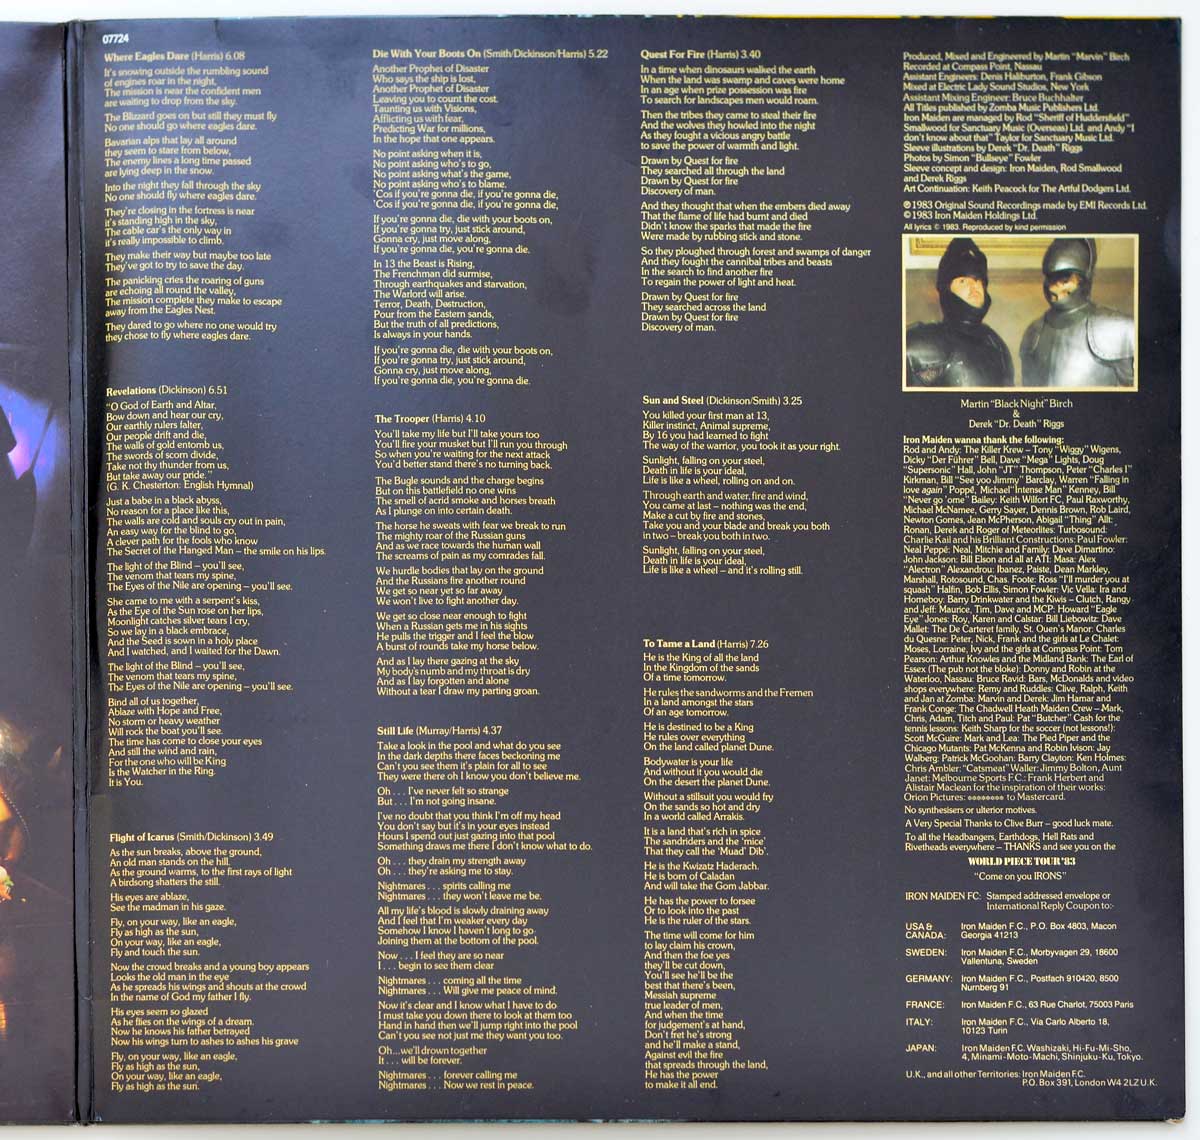 Photo of album back cover IRON MAIDEN - Piece of Mind ( Netherlands and Europe ) 